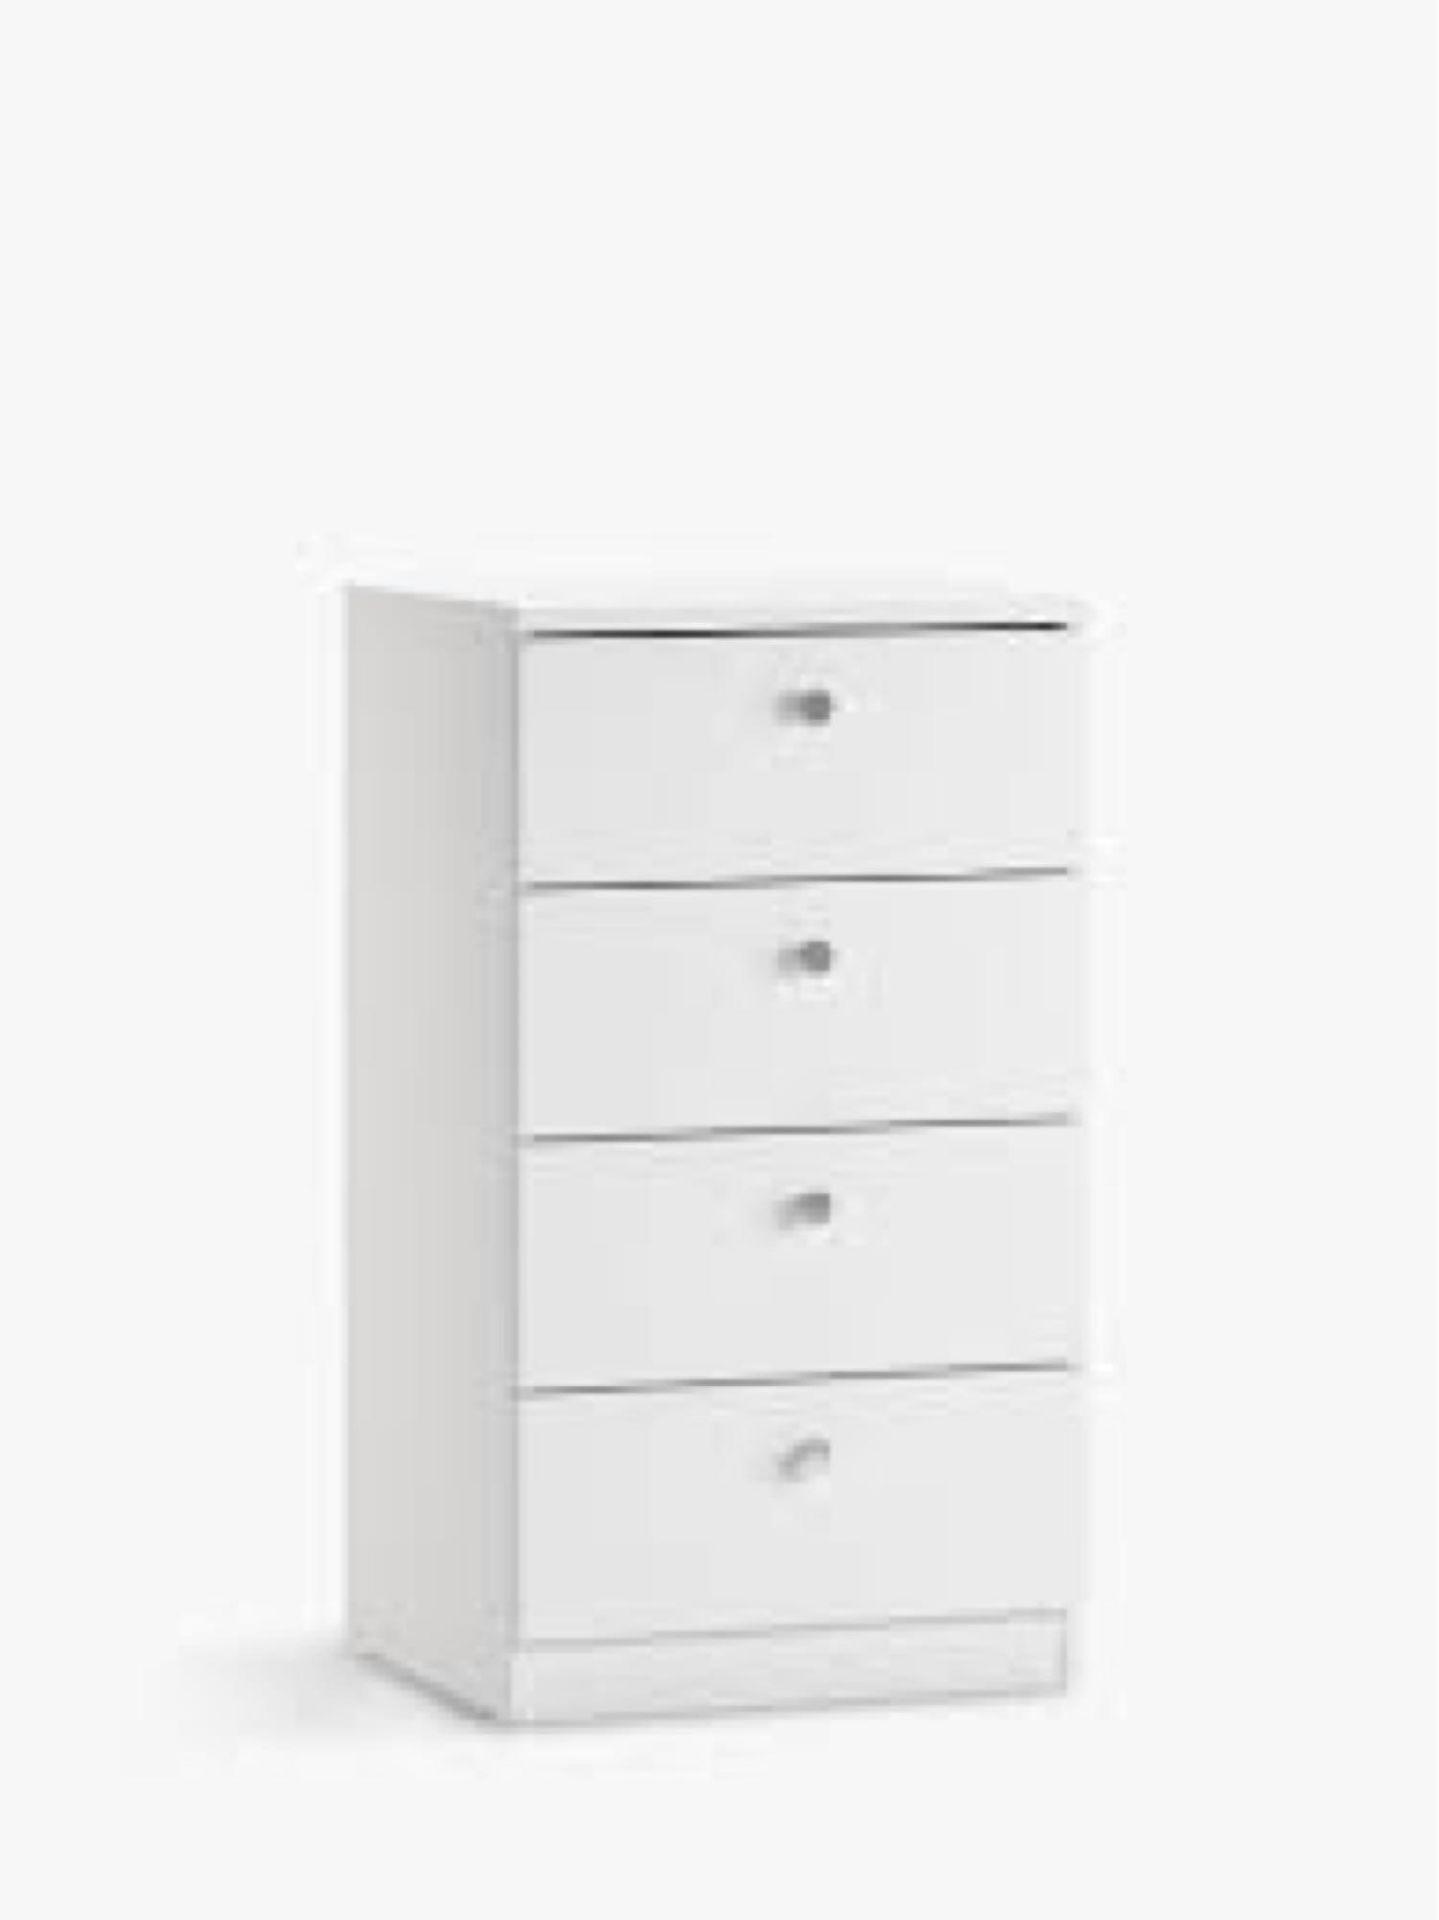 RRP £100 John Lewis And Partners Mix It Four Drawer Tall Chest Of Drawers Carcus Only 3045313 (